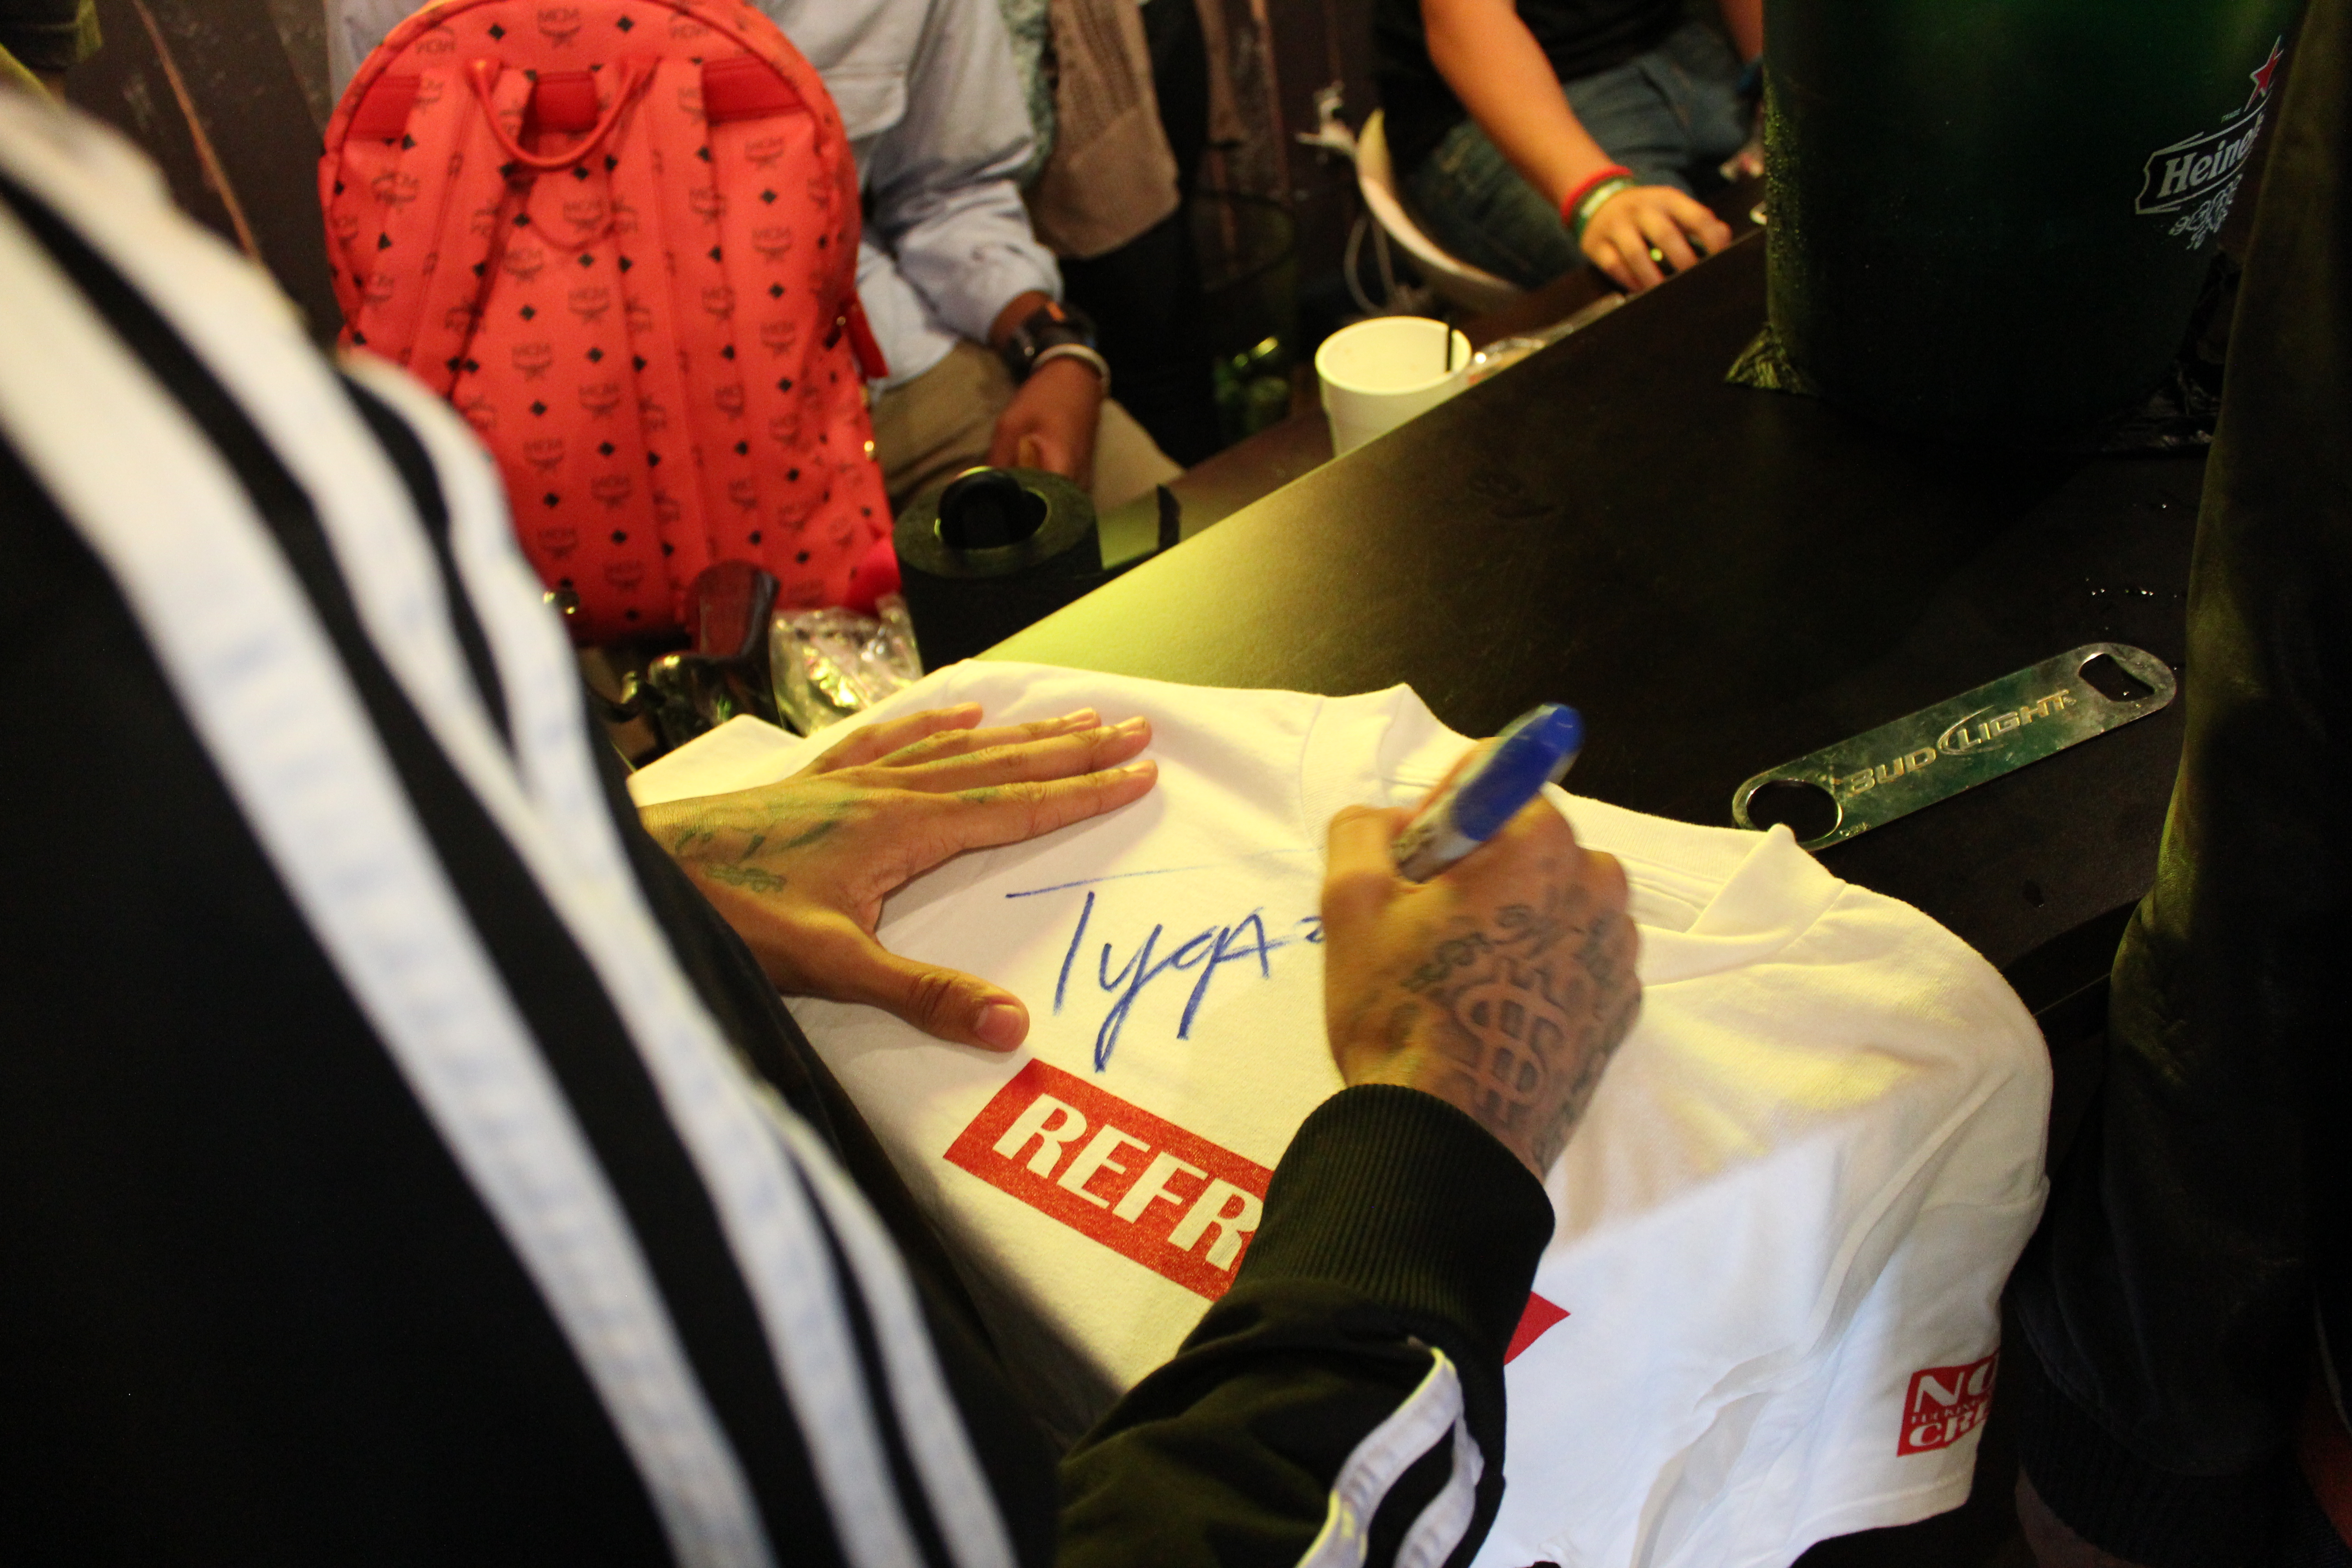 TYGA SIGNING AUTOGRAPHS FOR